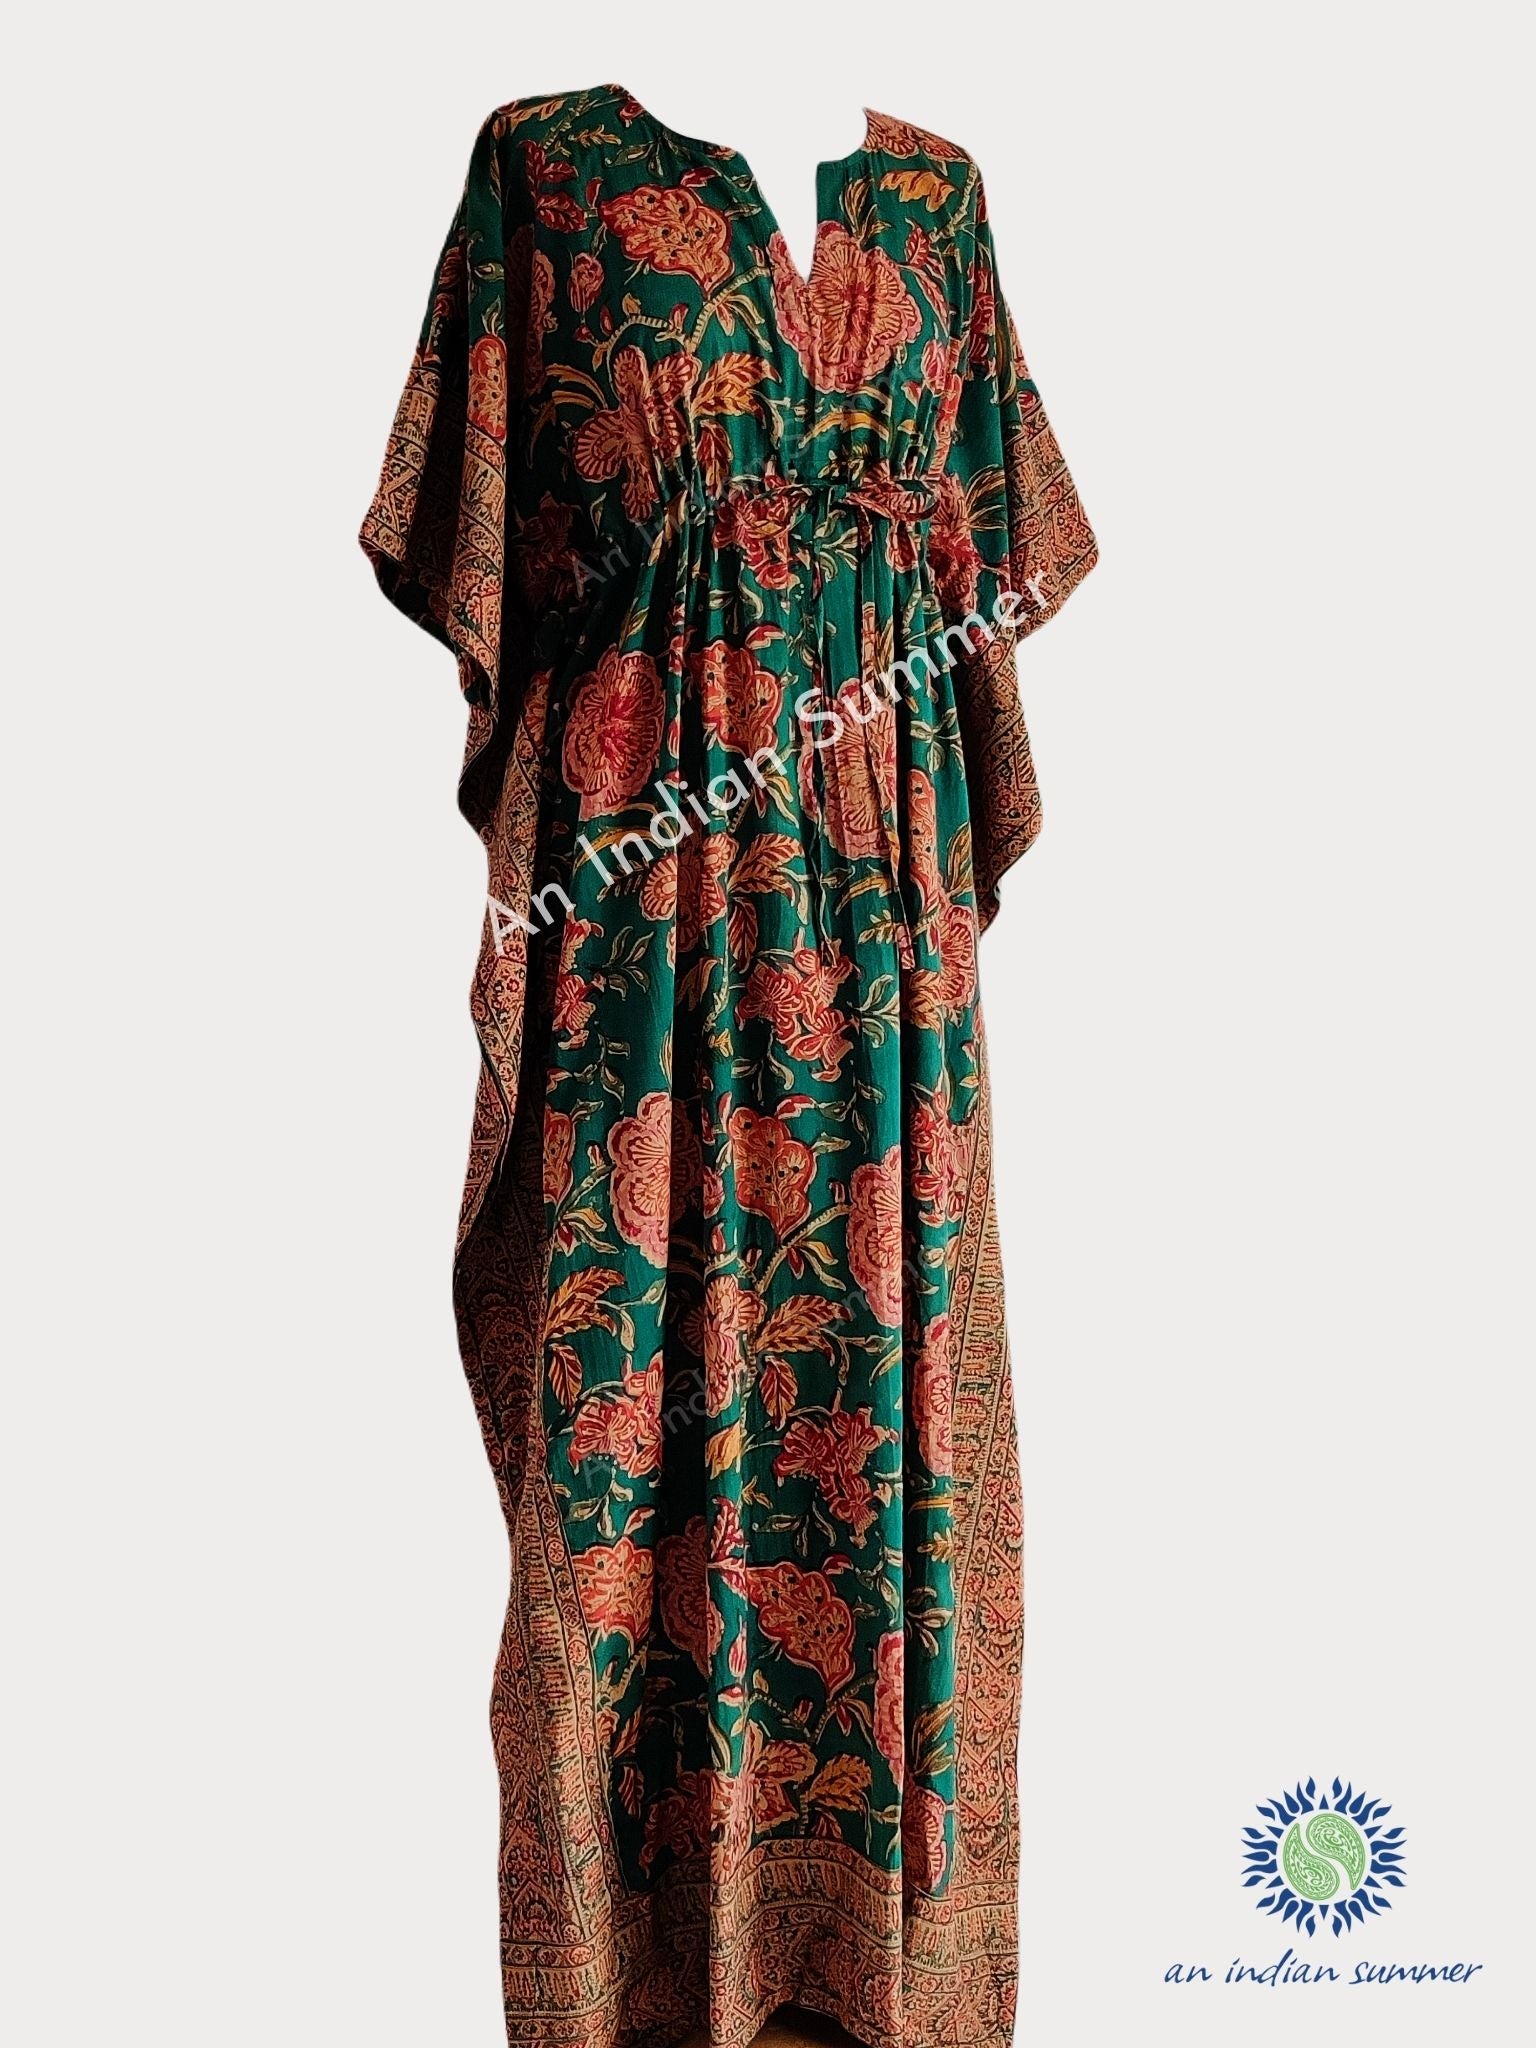 Long Kaftan | Tree of Life | Green | Wood Block Print | Hand Block Printed | Cotton | An Indian Summer | Seasonless Timeless Sustainable Ethical Authentic Artisan Conscious Clothing Lifestyle Brand